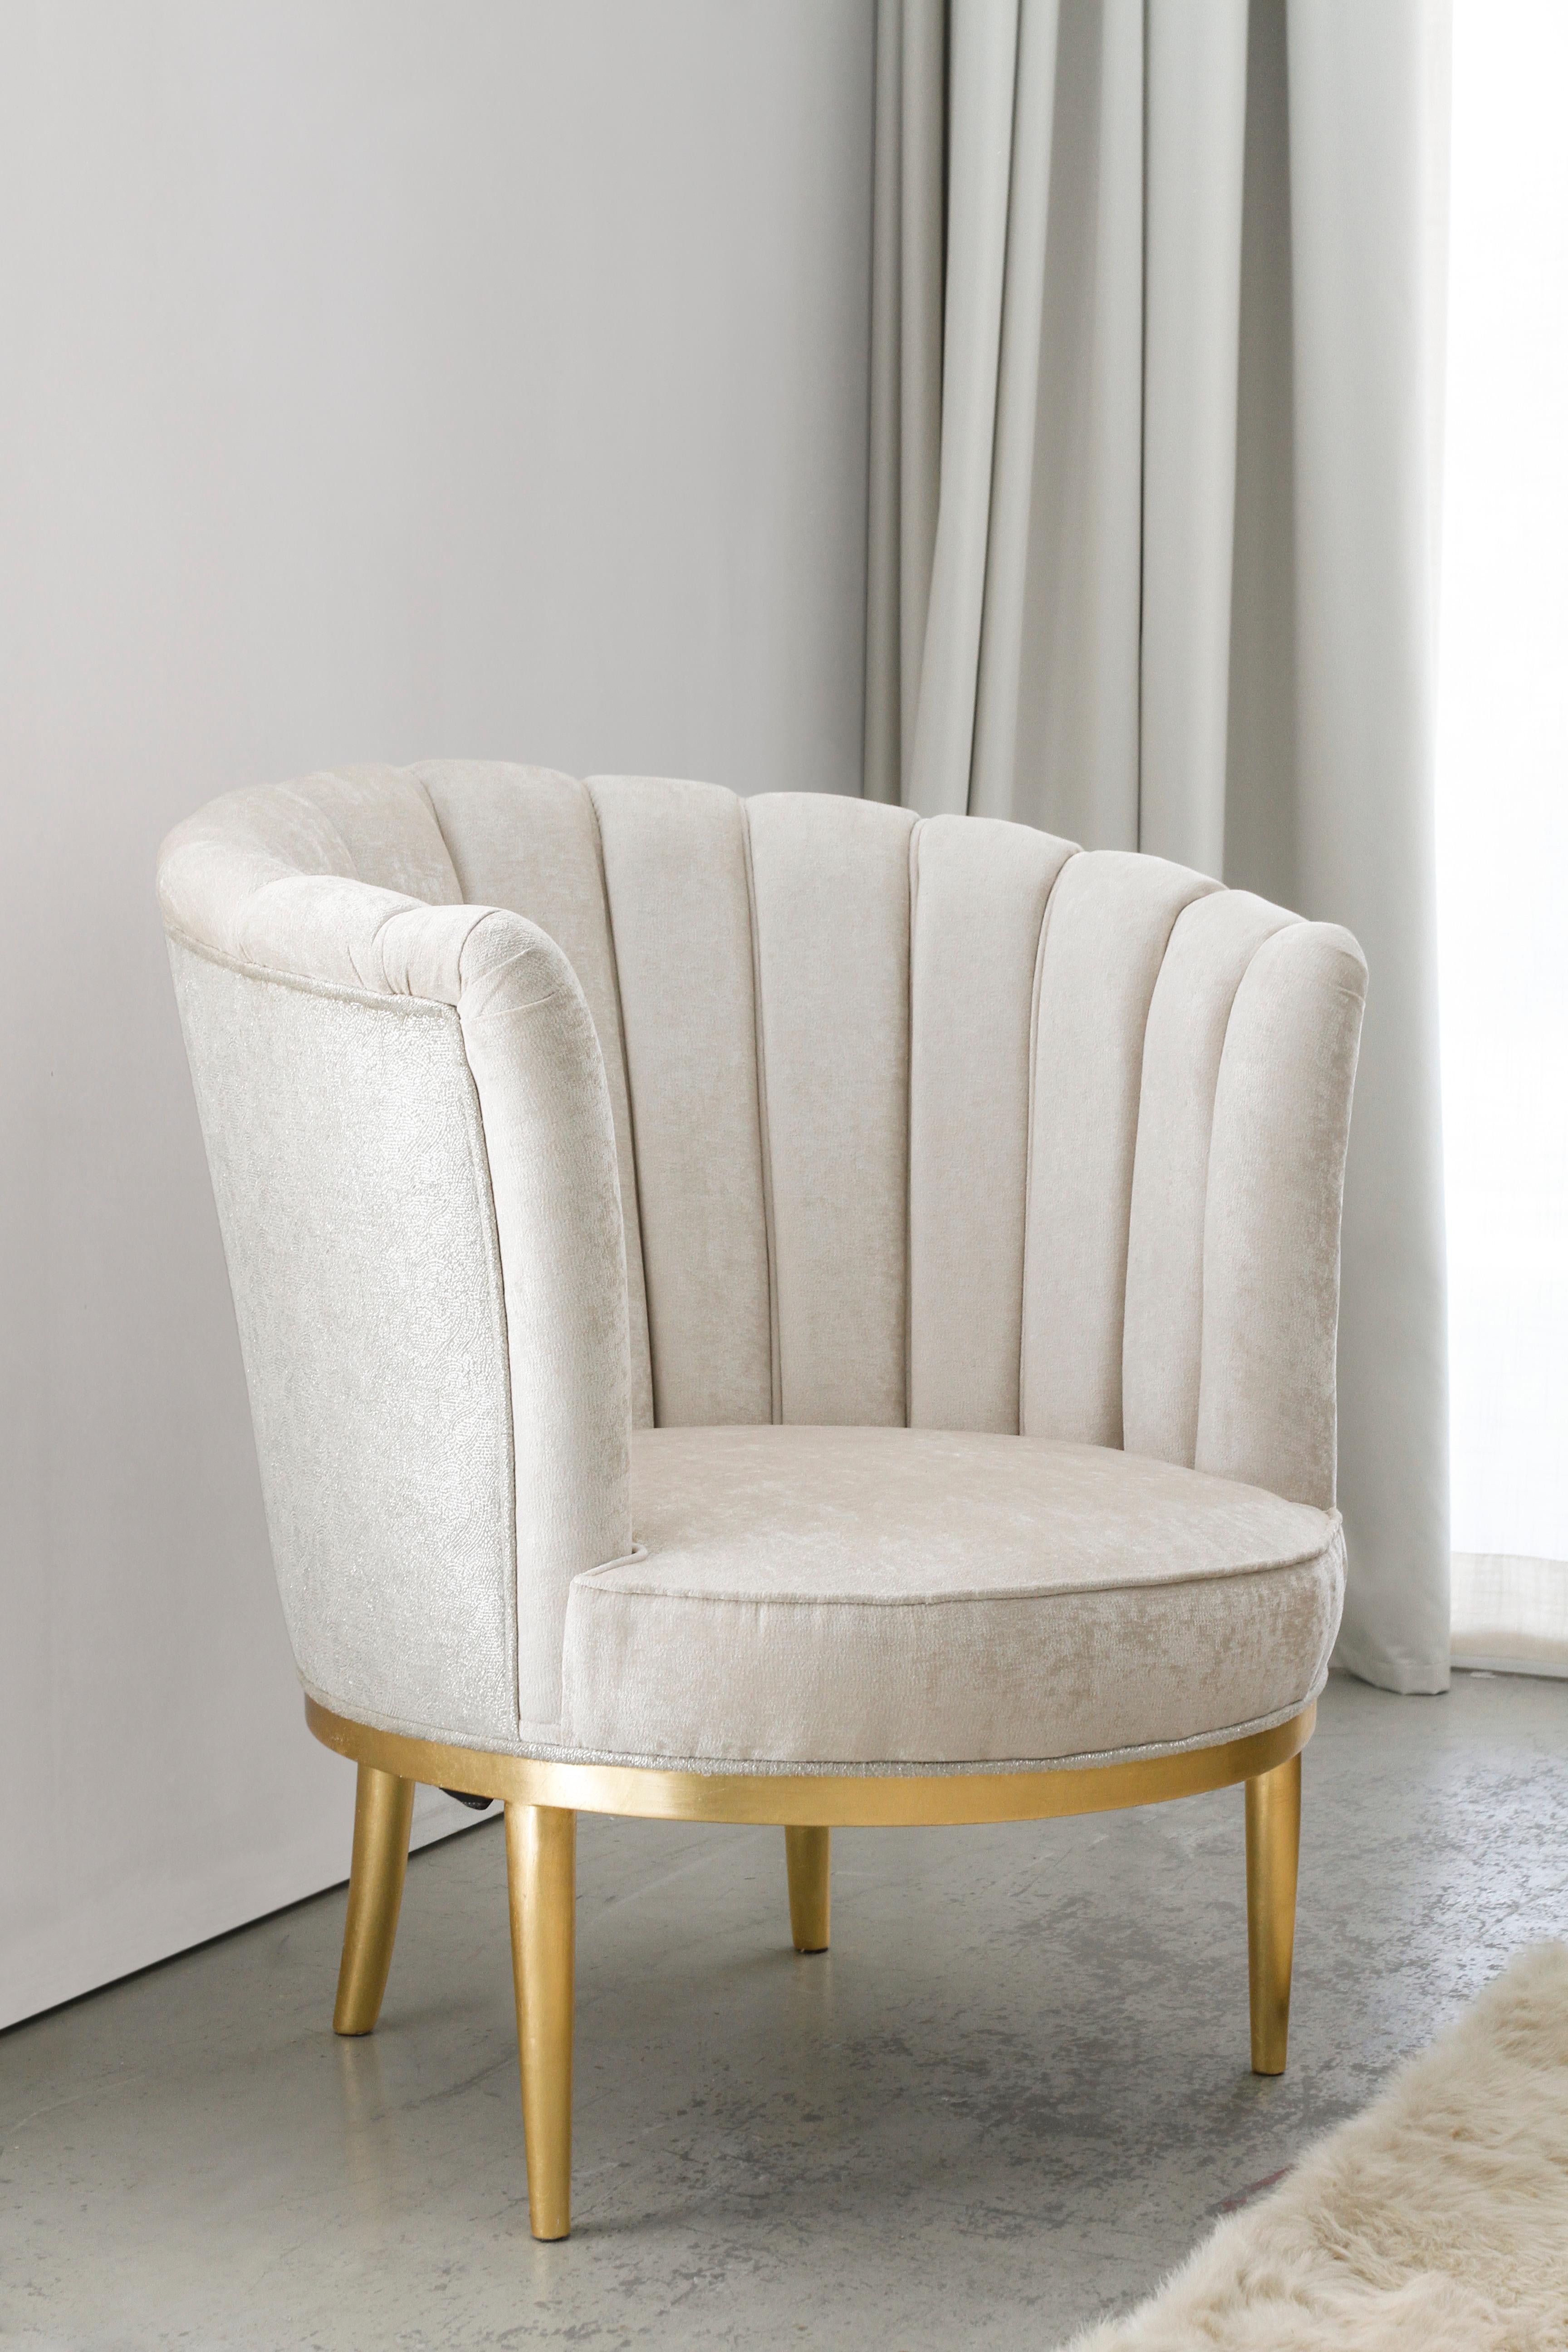 Lisboa armchair, Modern Collection, Handcrafted in Portugal - Europe by GF Modern.

The Lisboa armchair adds a sophisticated and elegant touch to any living area. The armchair is upholstered in beige velvet and it exudes luxury and perfection. The